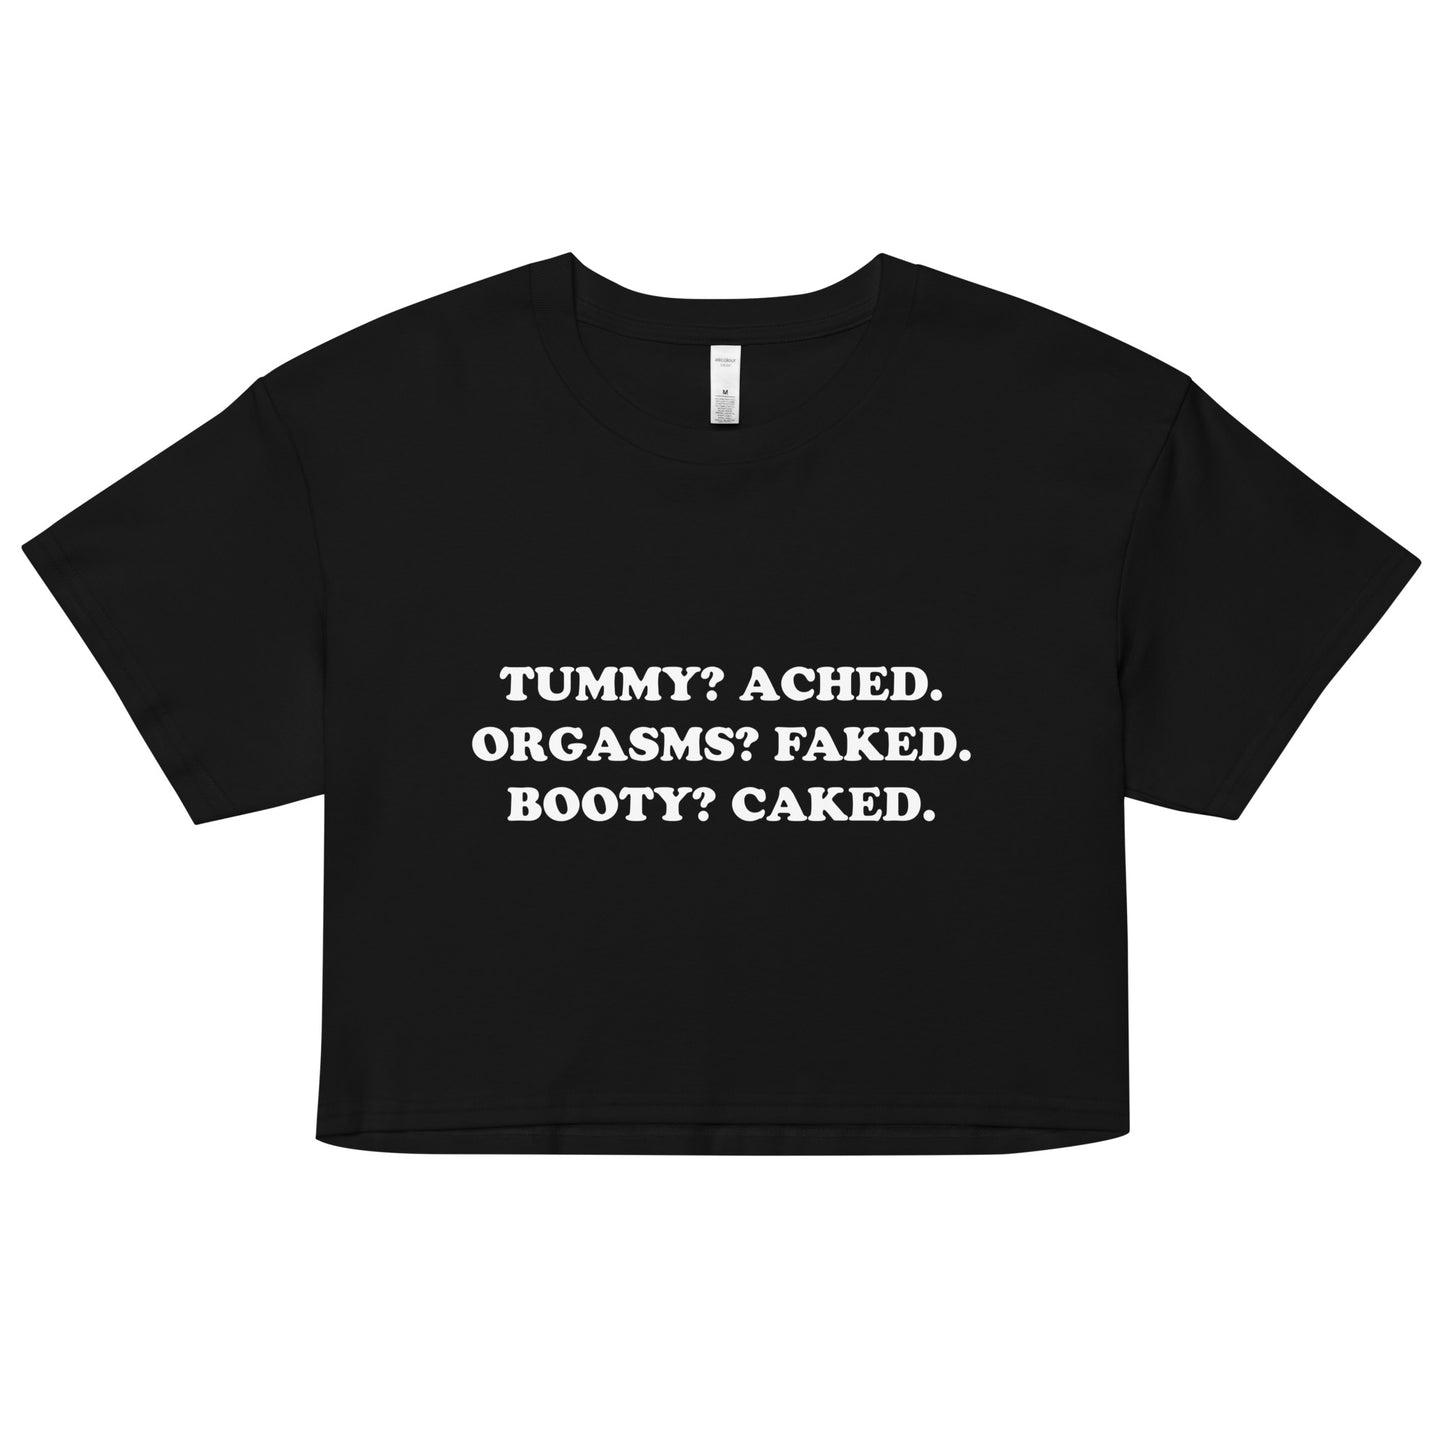 Tummy Ached Booty Caked crop top